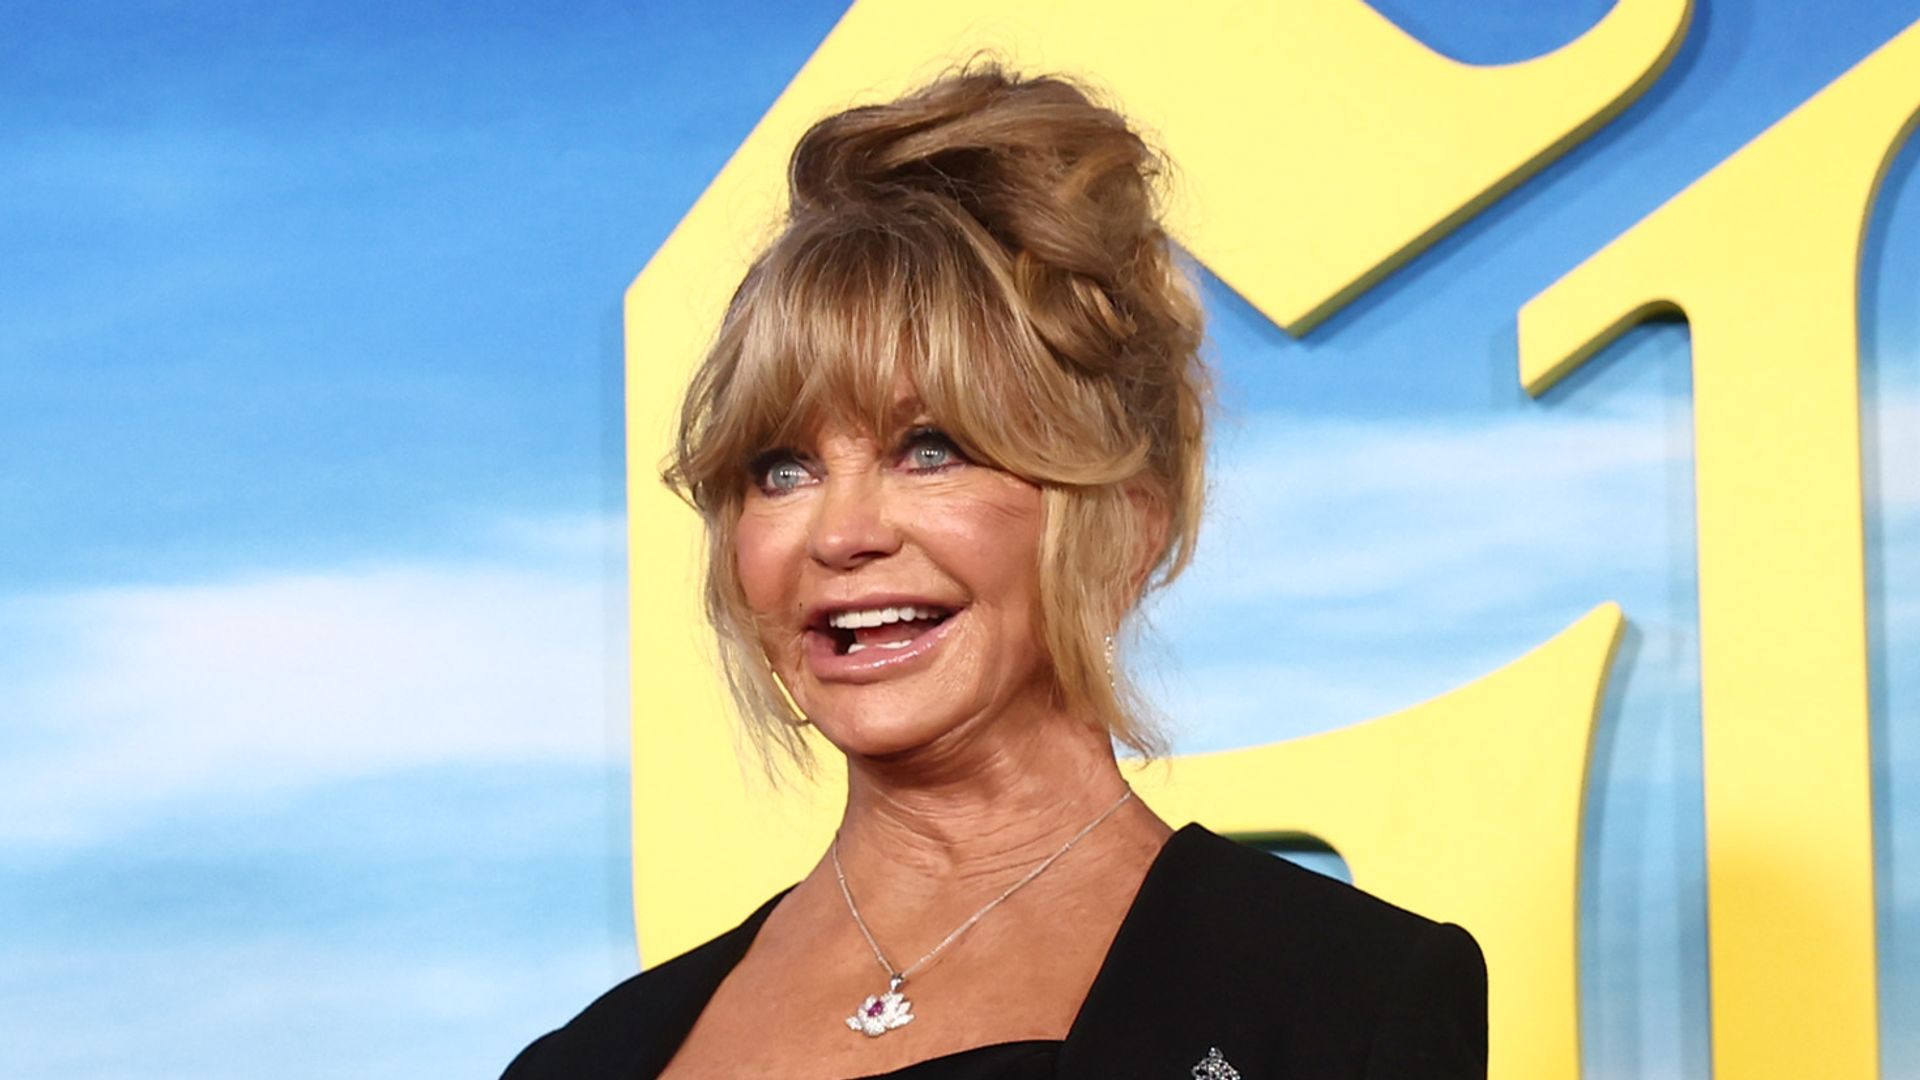 Goldie Hawn attends Netflix's "Glass Onion: A Knives Out Mystery" U.S. premiere